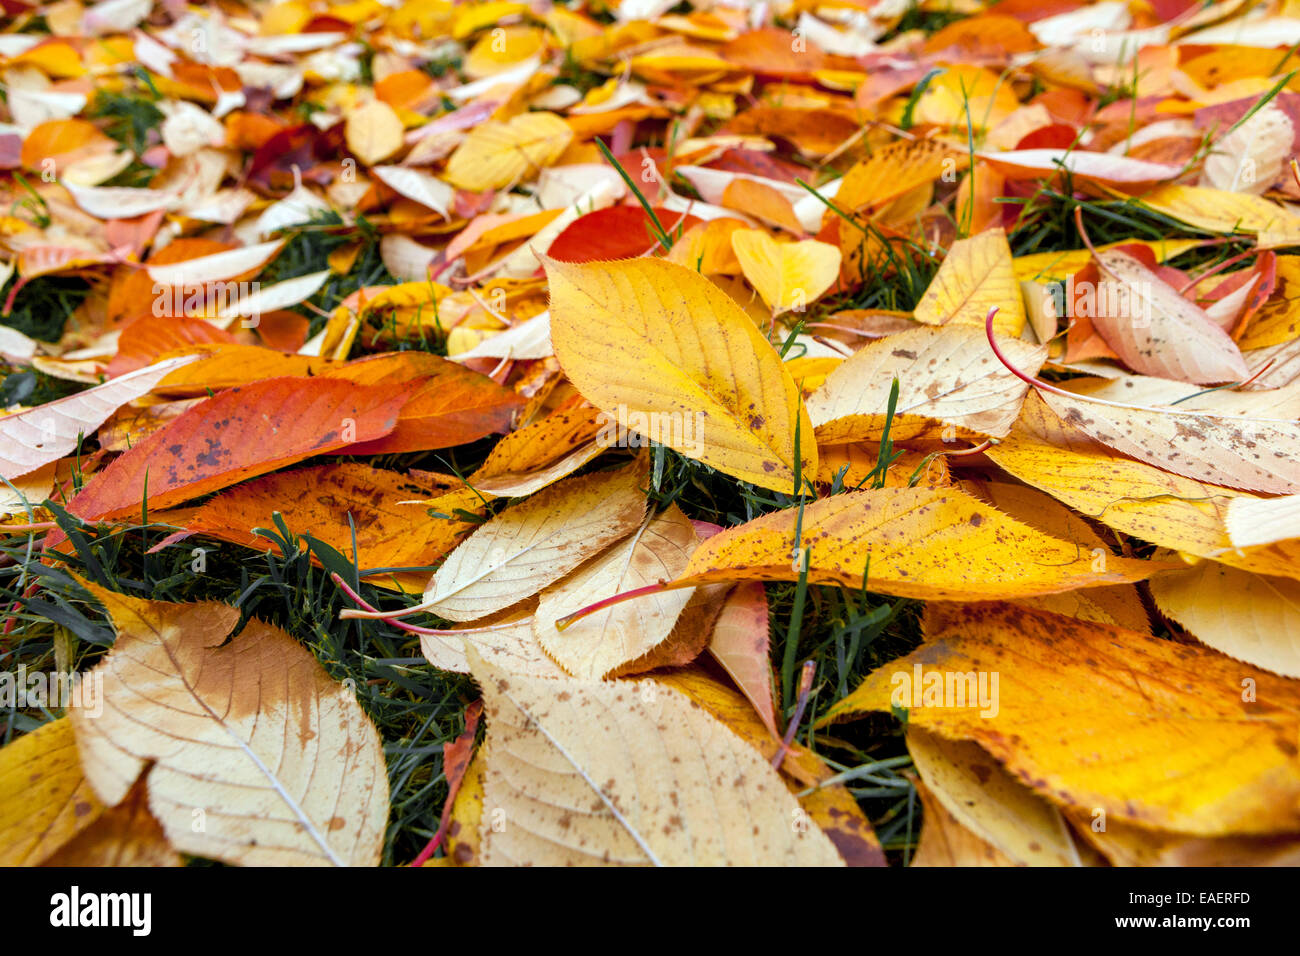 Fallen autumn Leaves on the ground lying on a grass Stock Photo